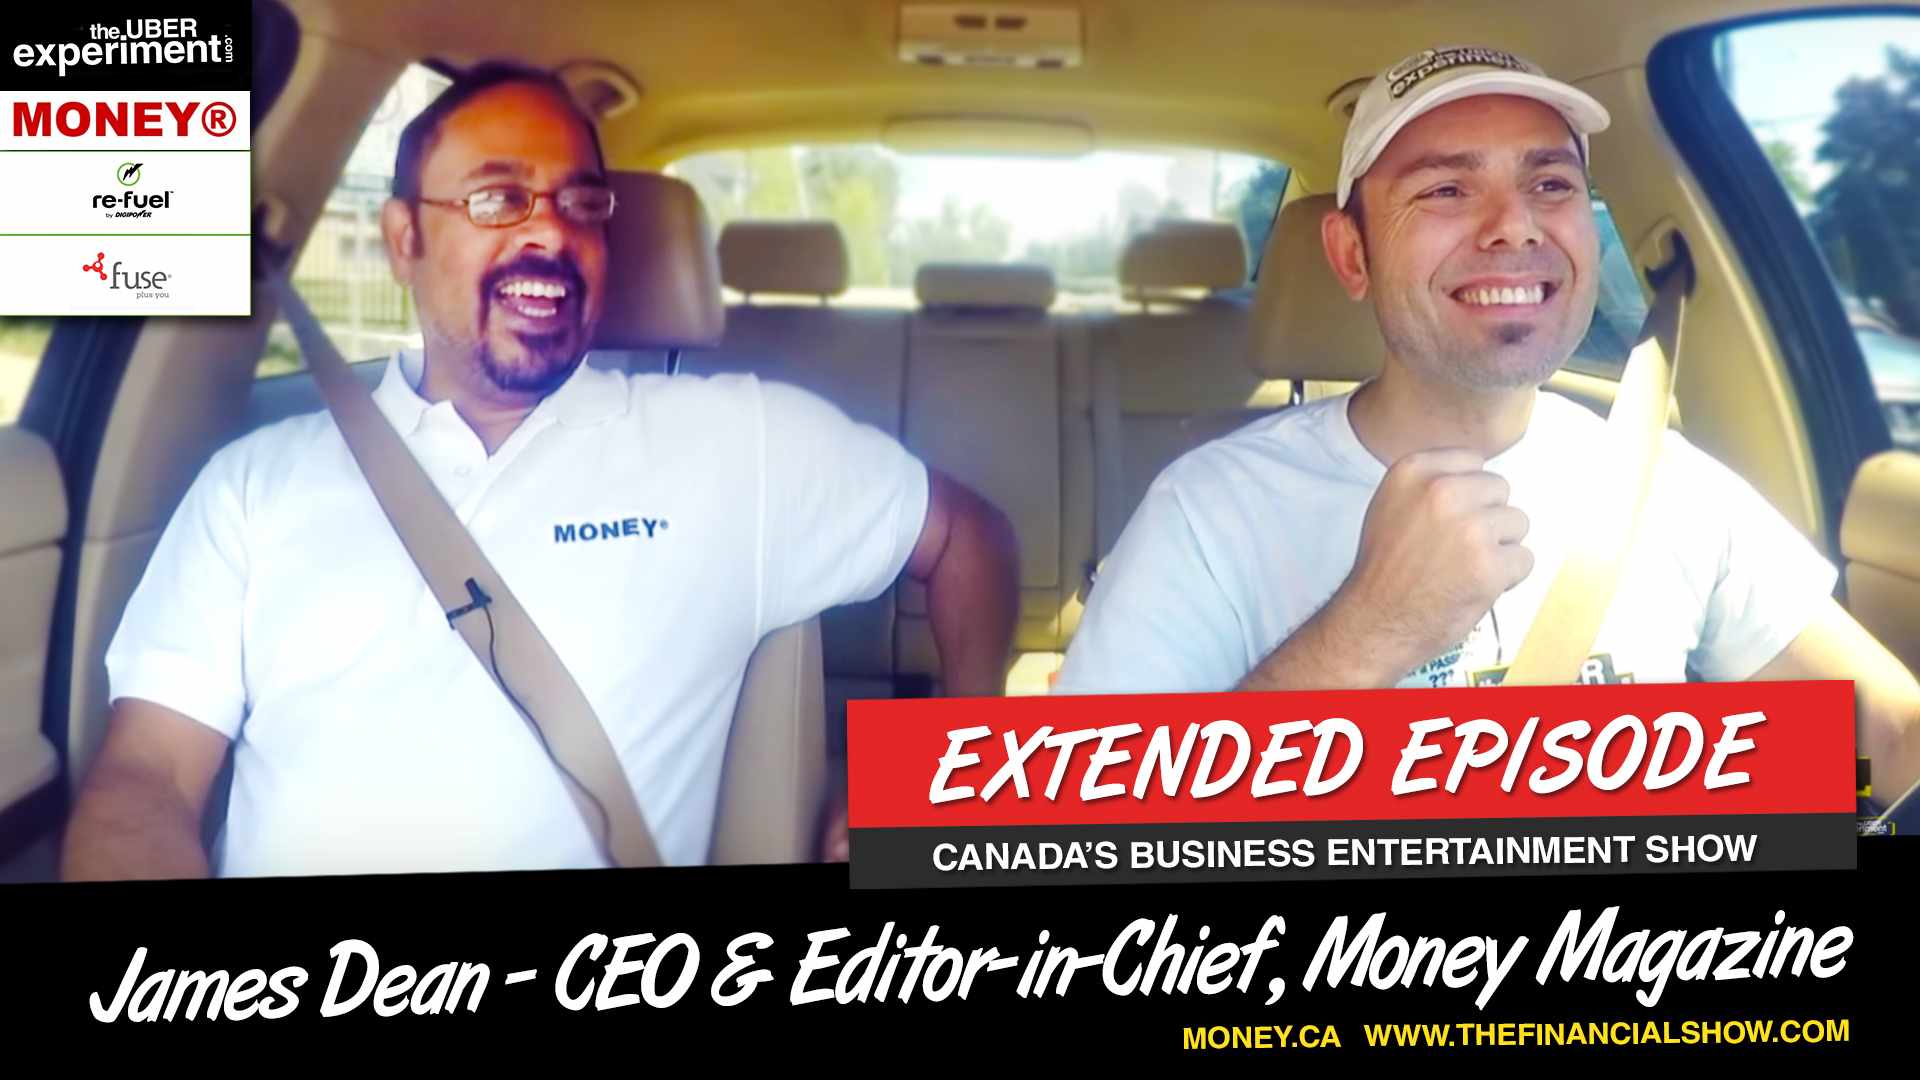 ROBBING A BANK WITH JAMES DEAN (Editor & President of MONEY Magazine on The Uber Experiment)